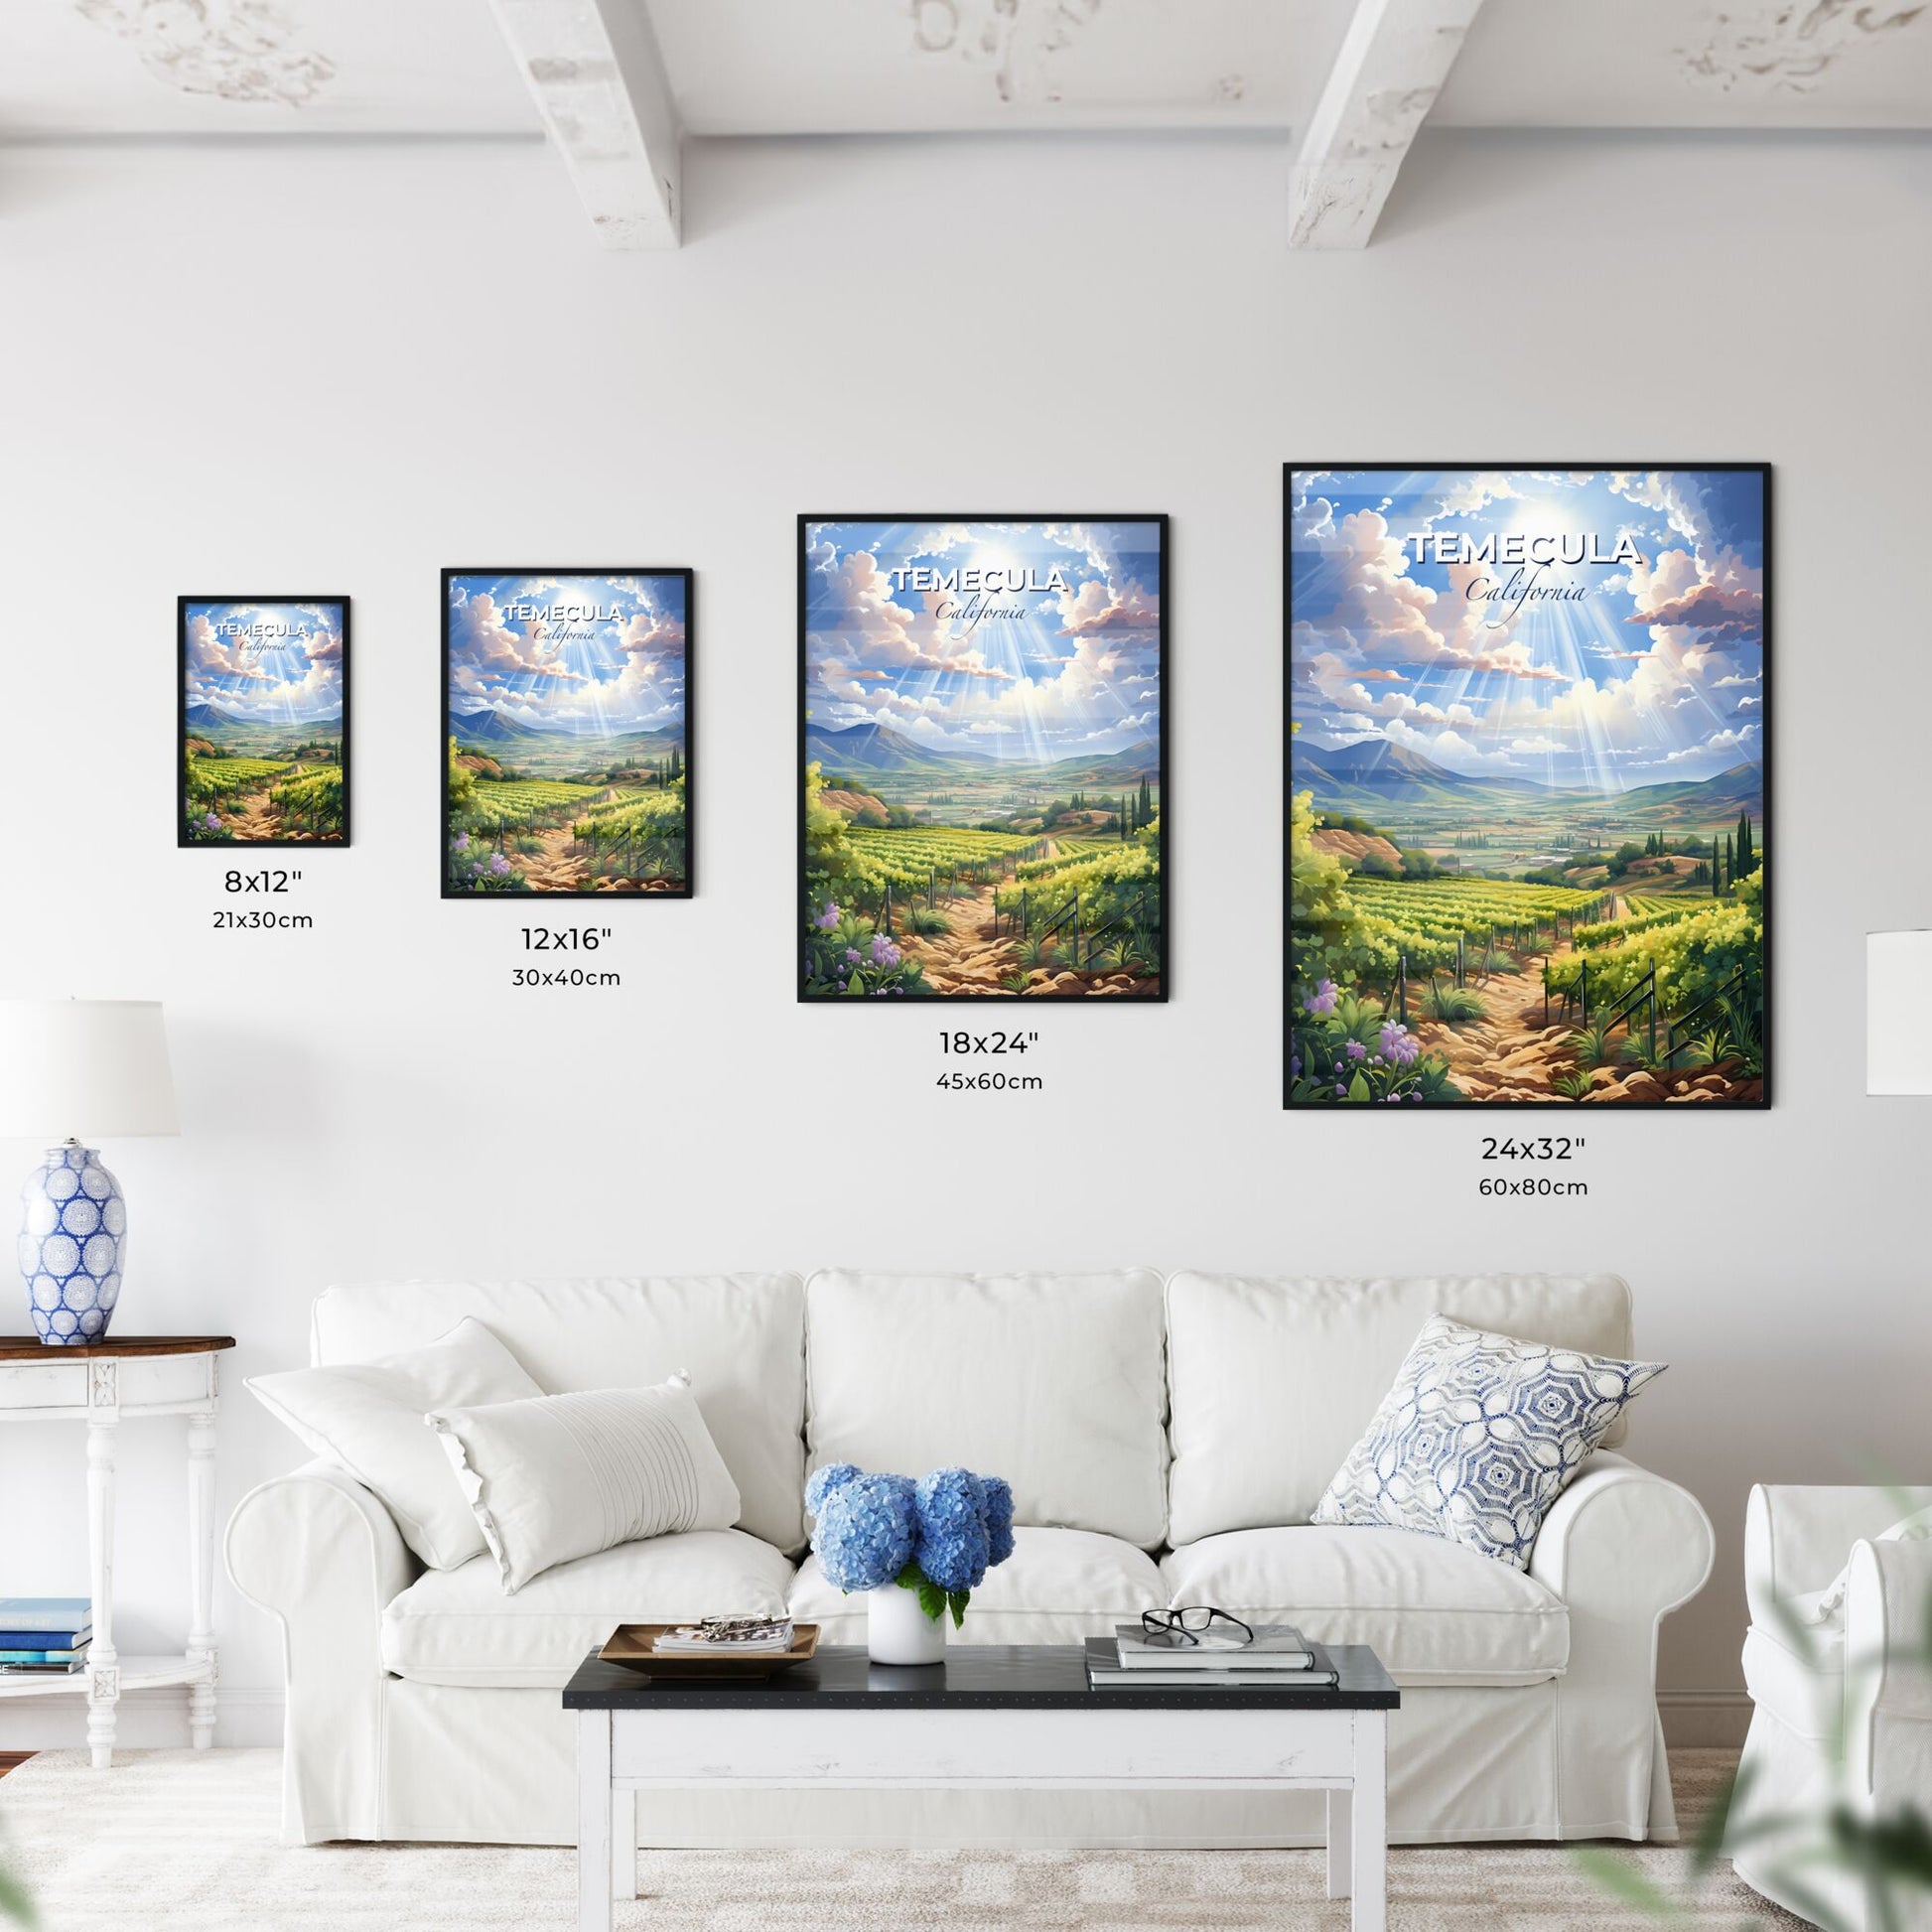 Temecula, California, A Poster of a landscape with a vineyard and mountains Default Title